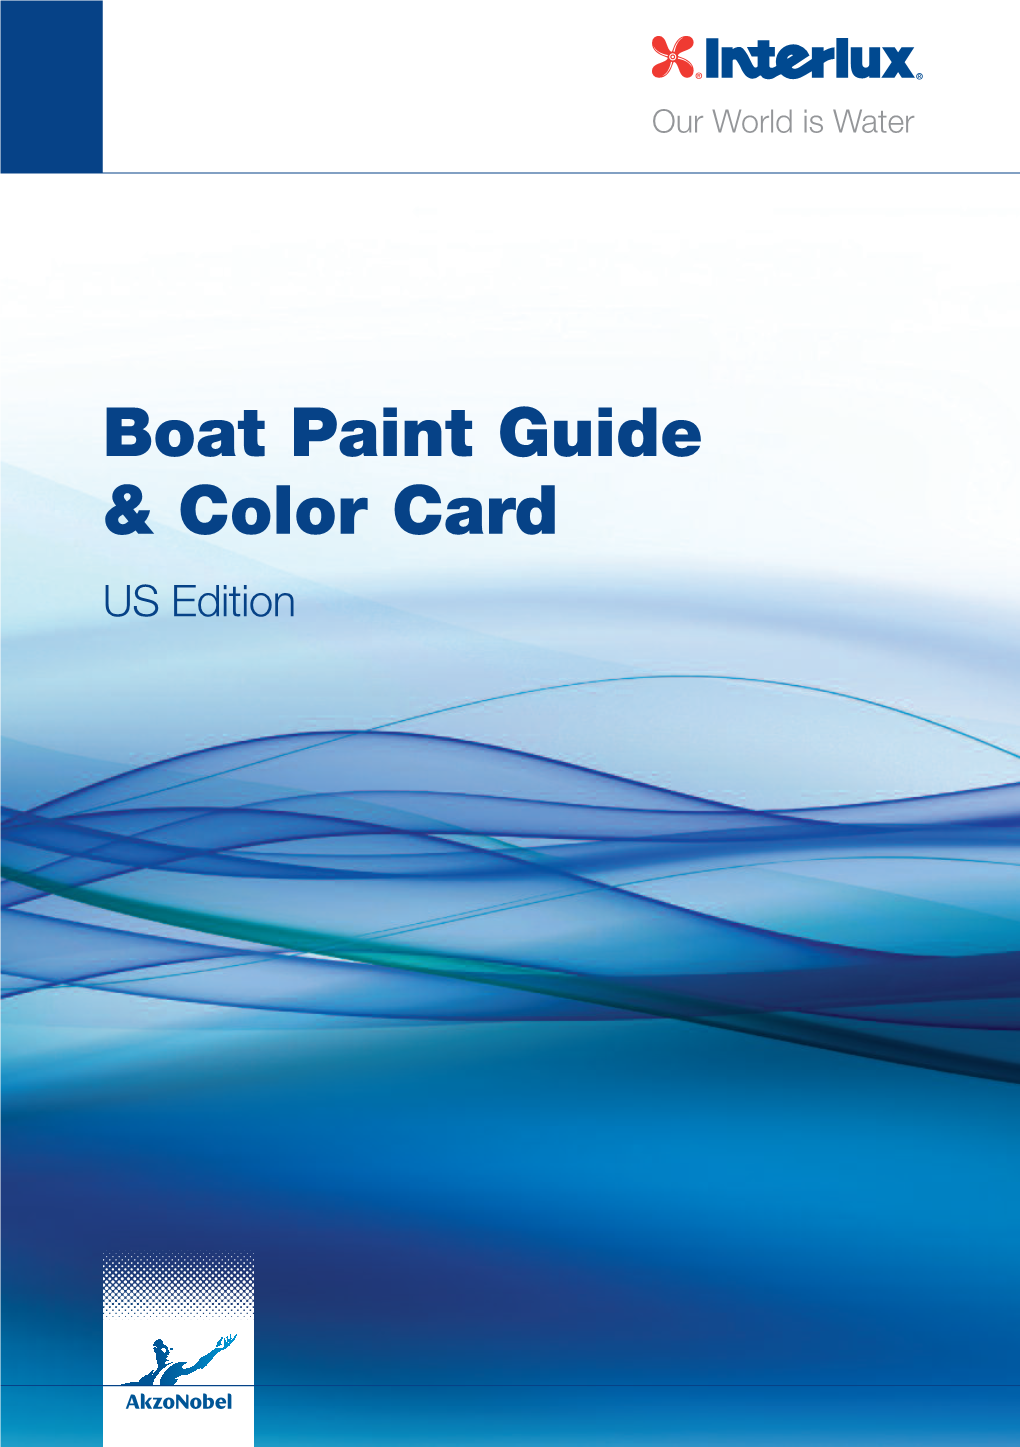 Boat Paint Guide & Color Card